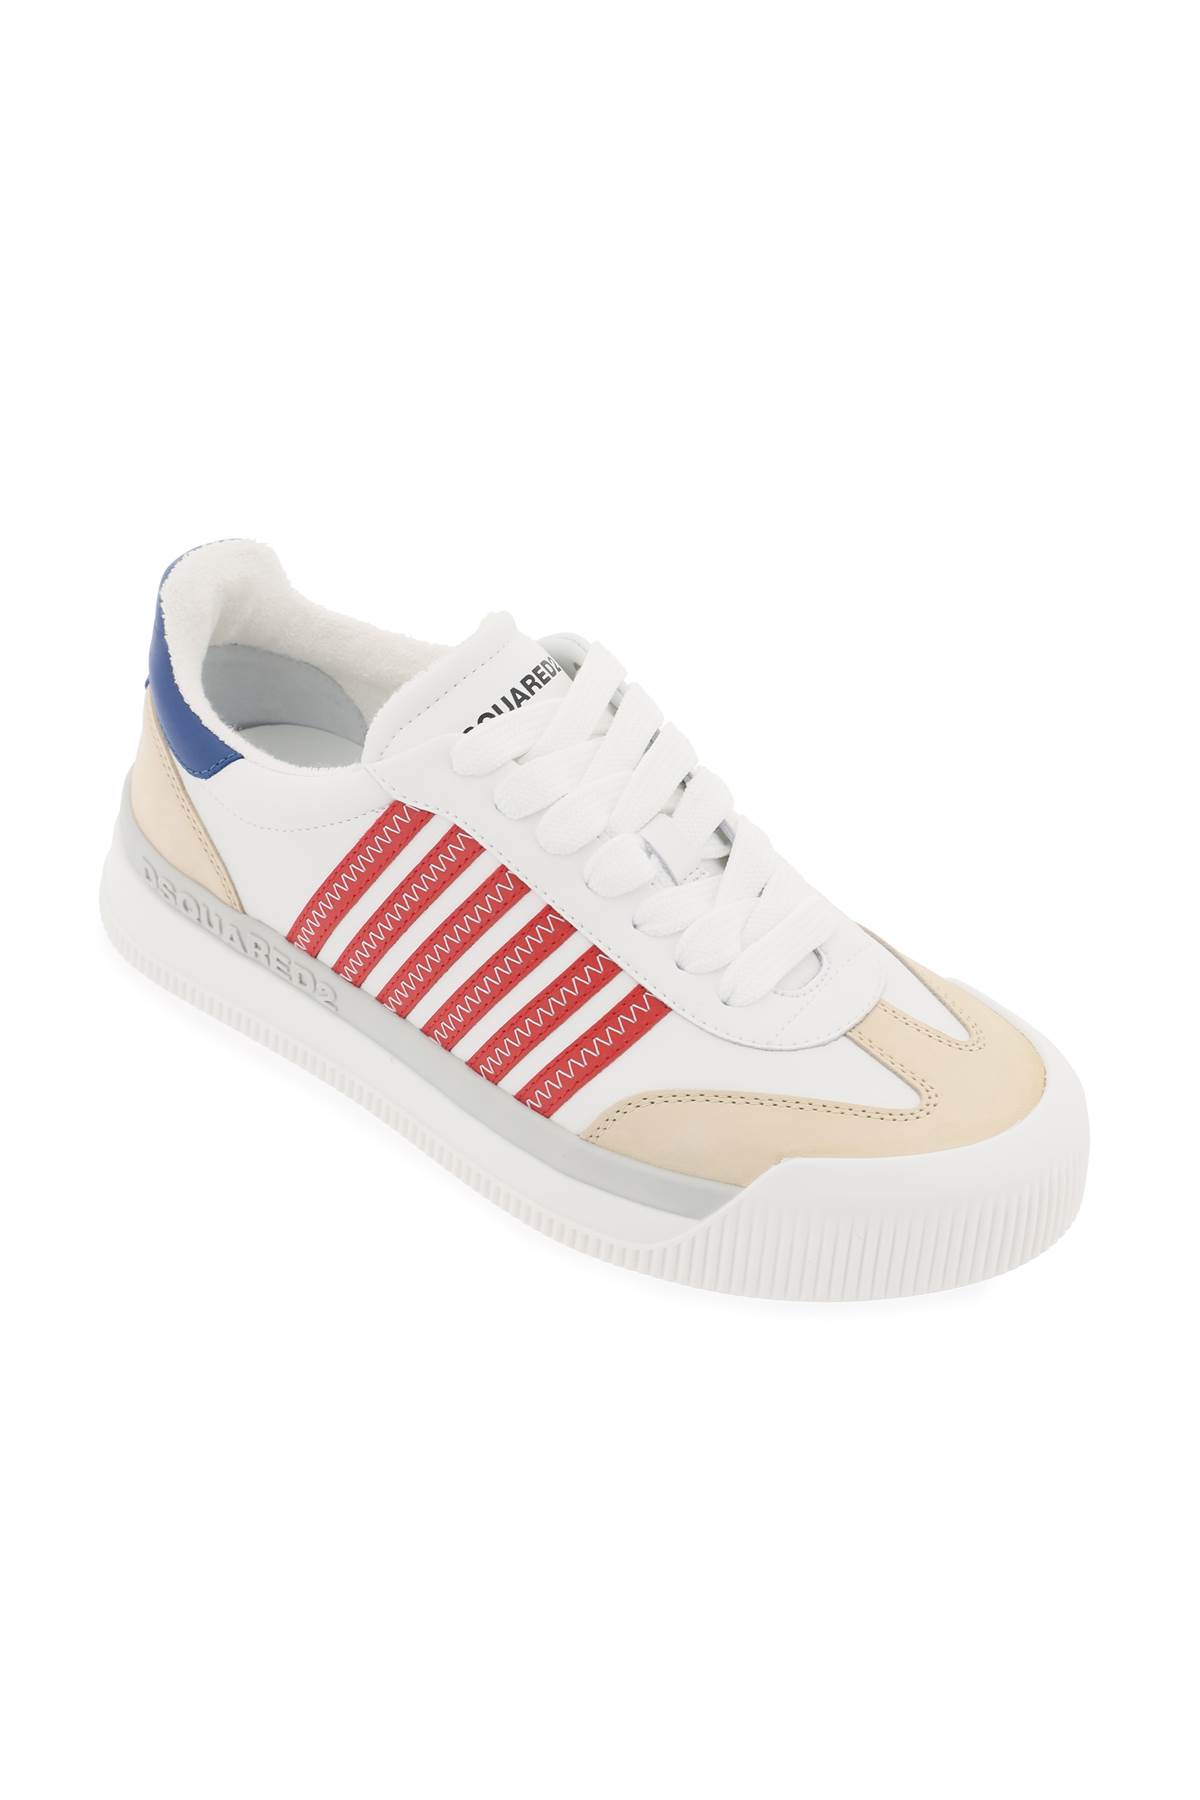 Shop Dsquared2 New Jersey Sneakers In White Red Blue (white)